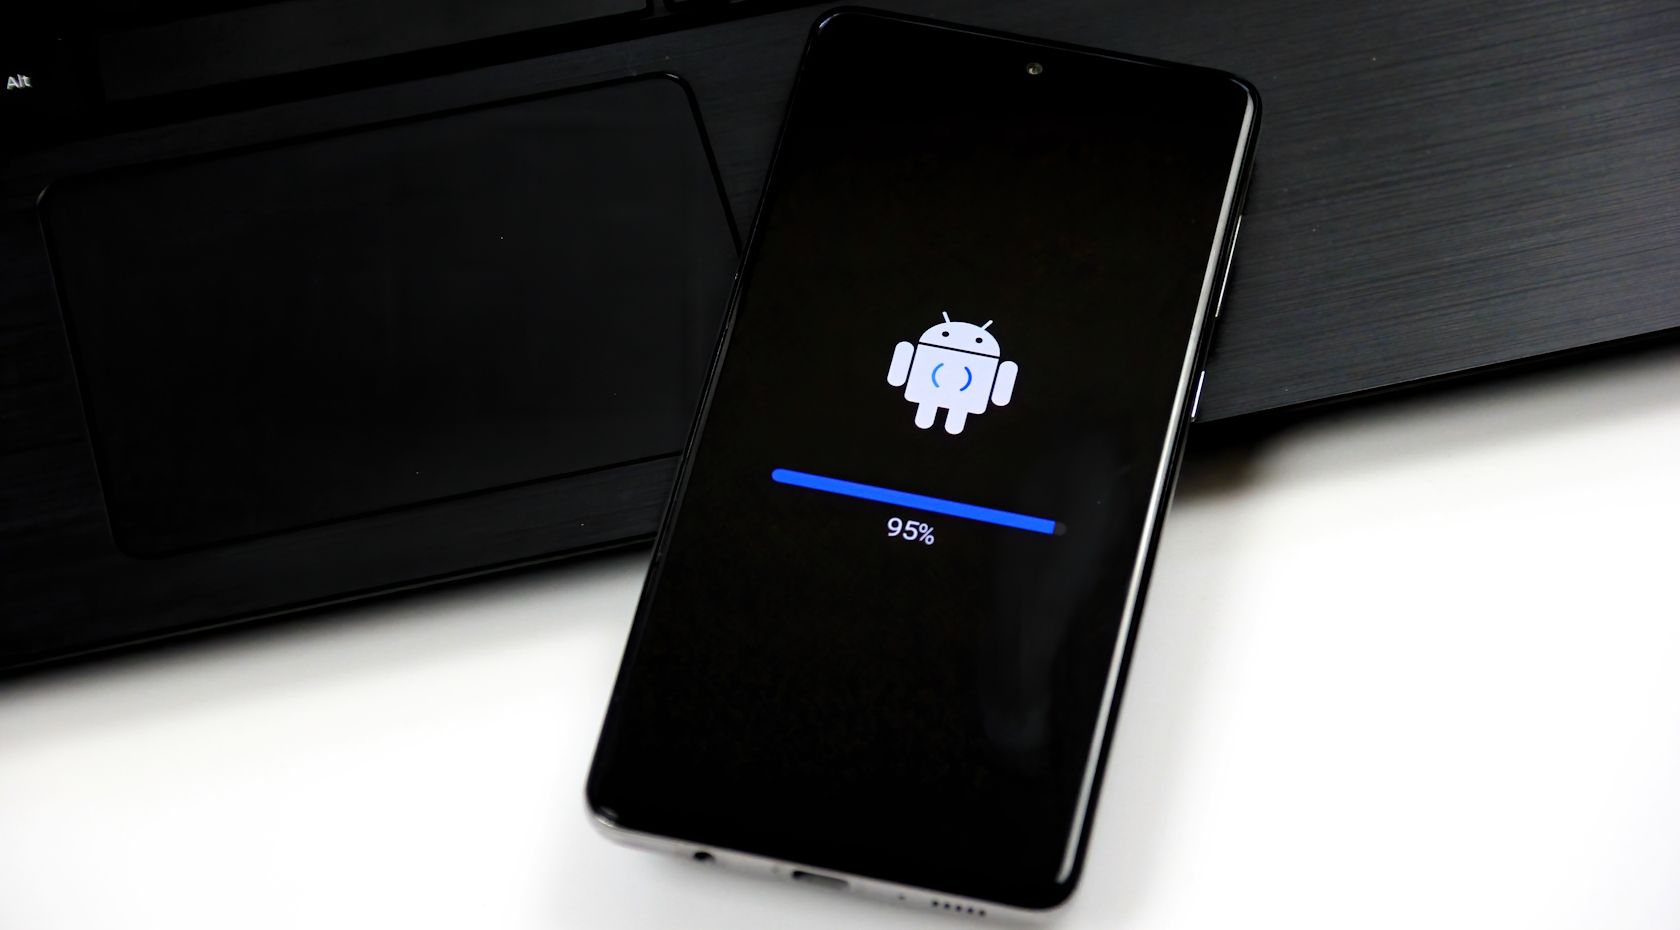 Android OS updating on a Samsung phone